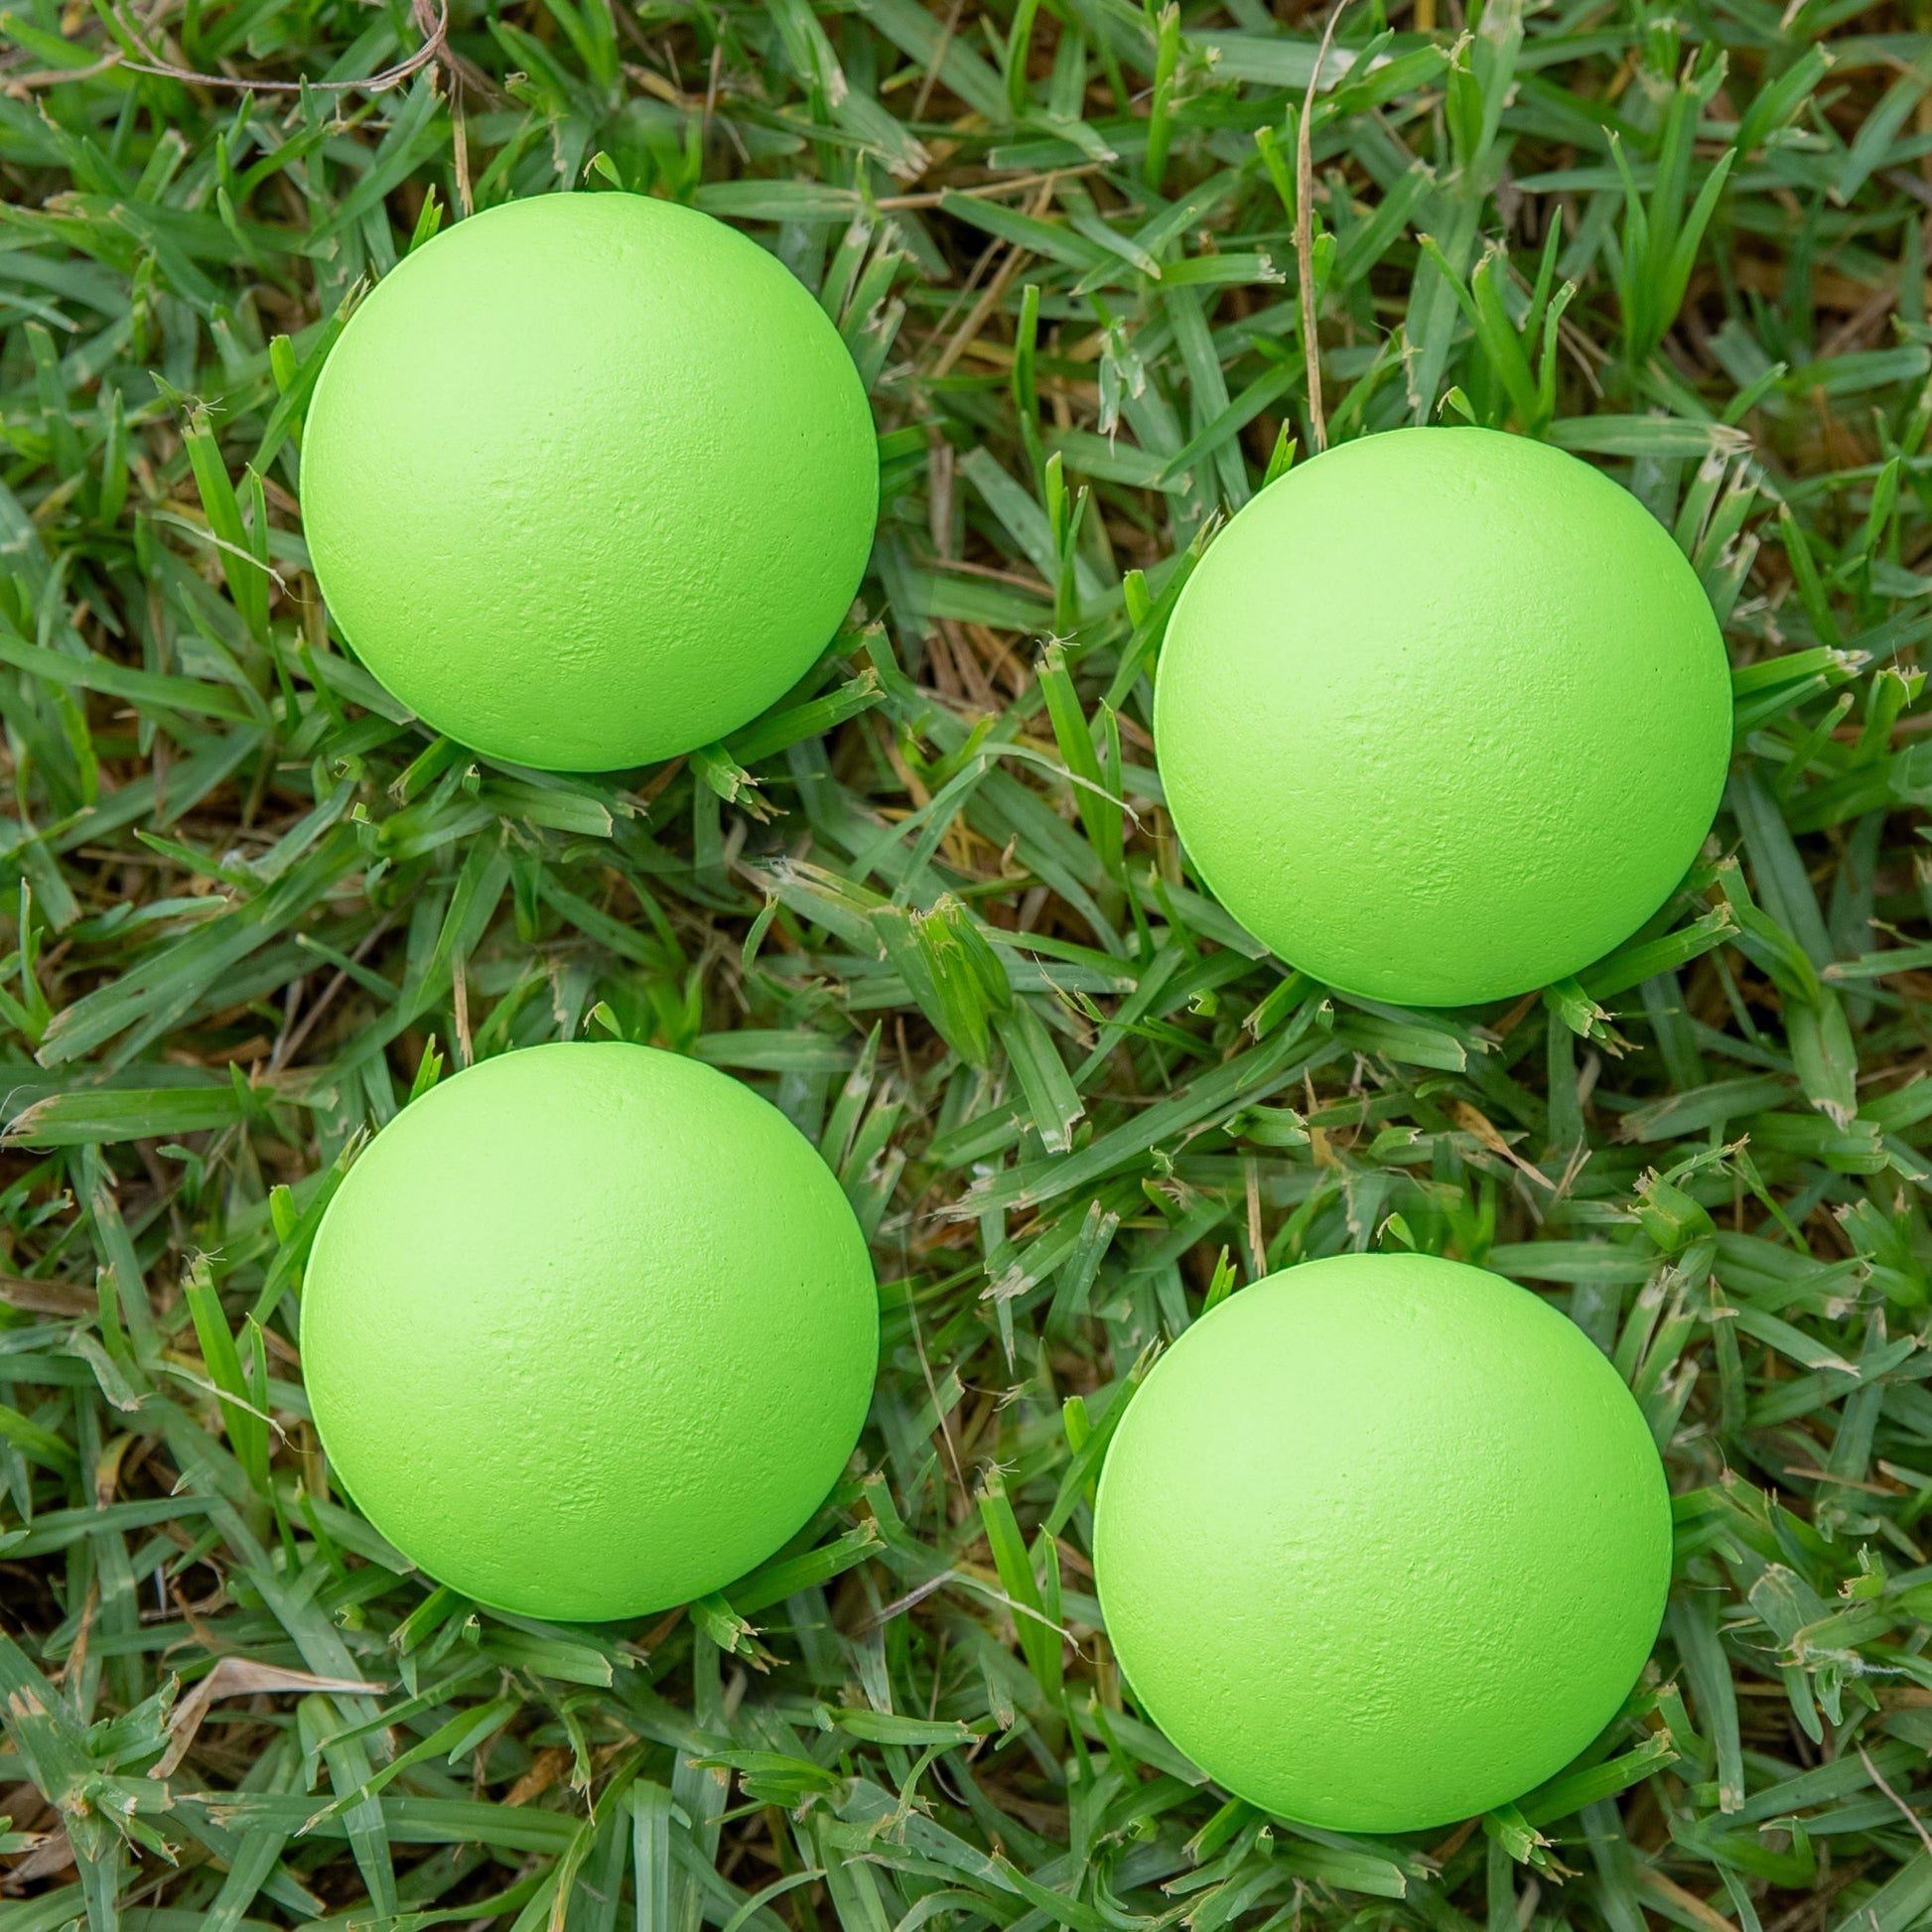 Hackees Lime Ball Hackees 4 Pack 